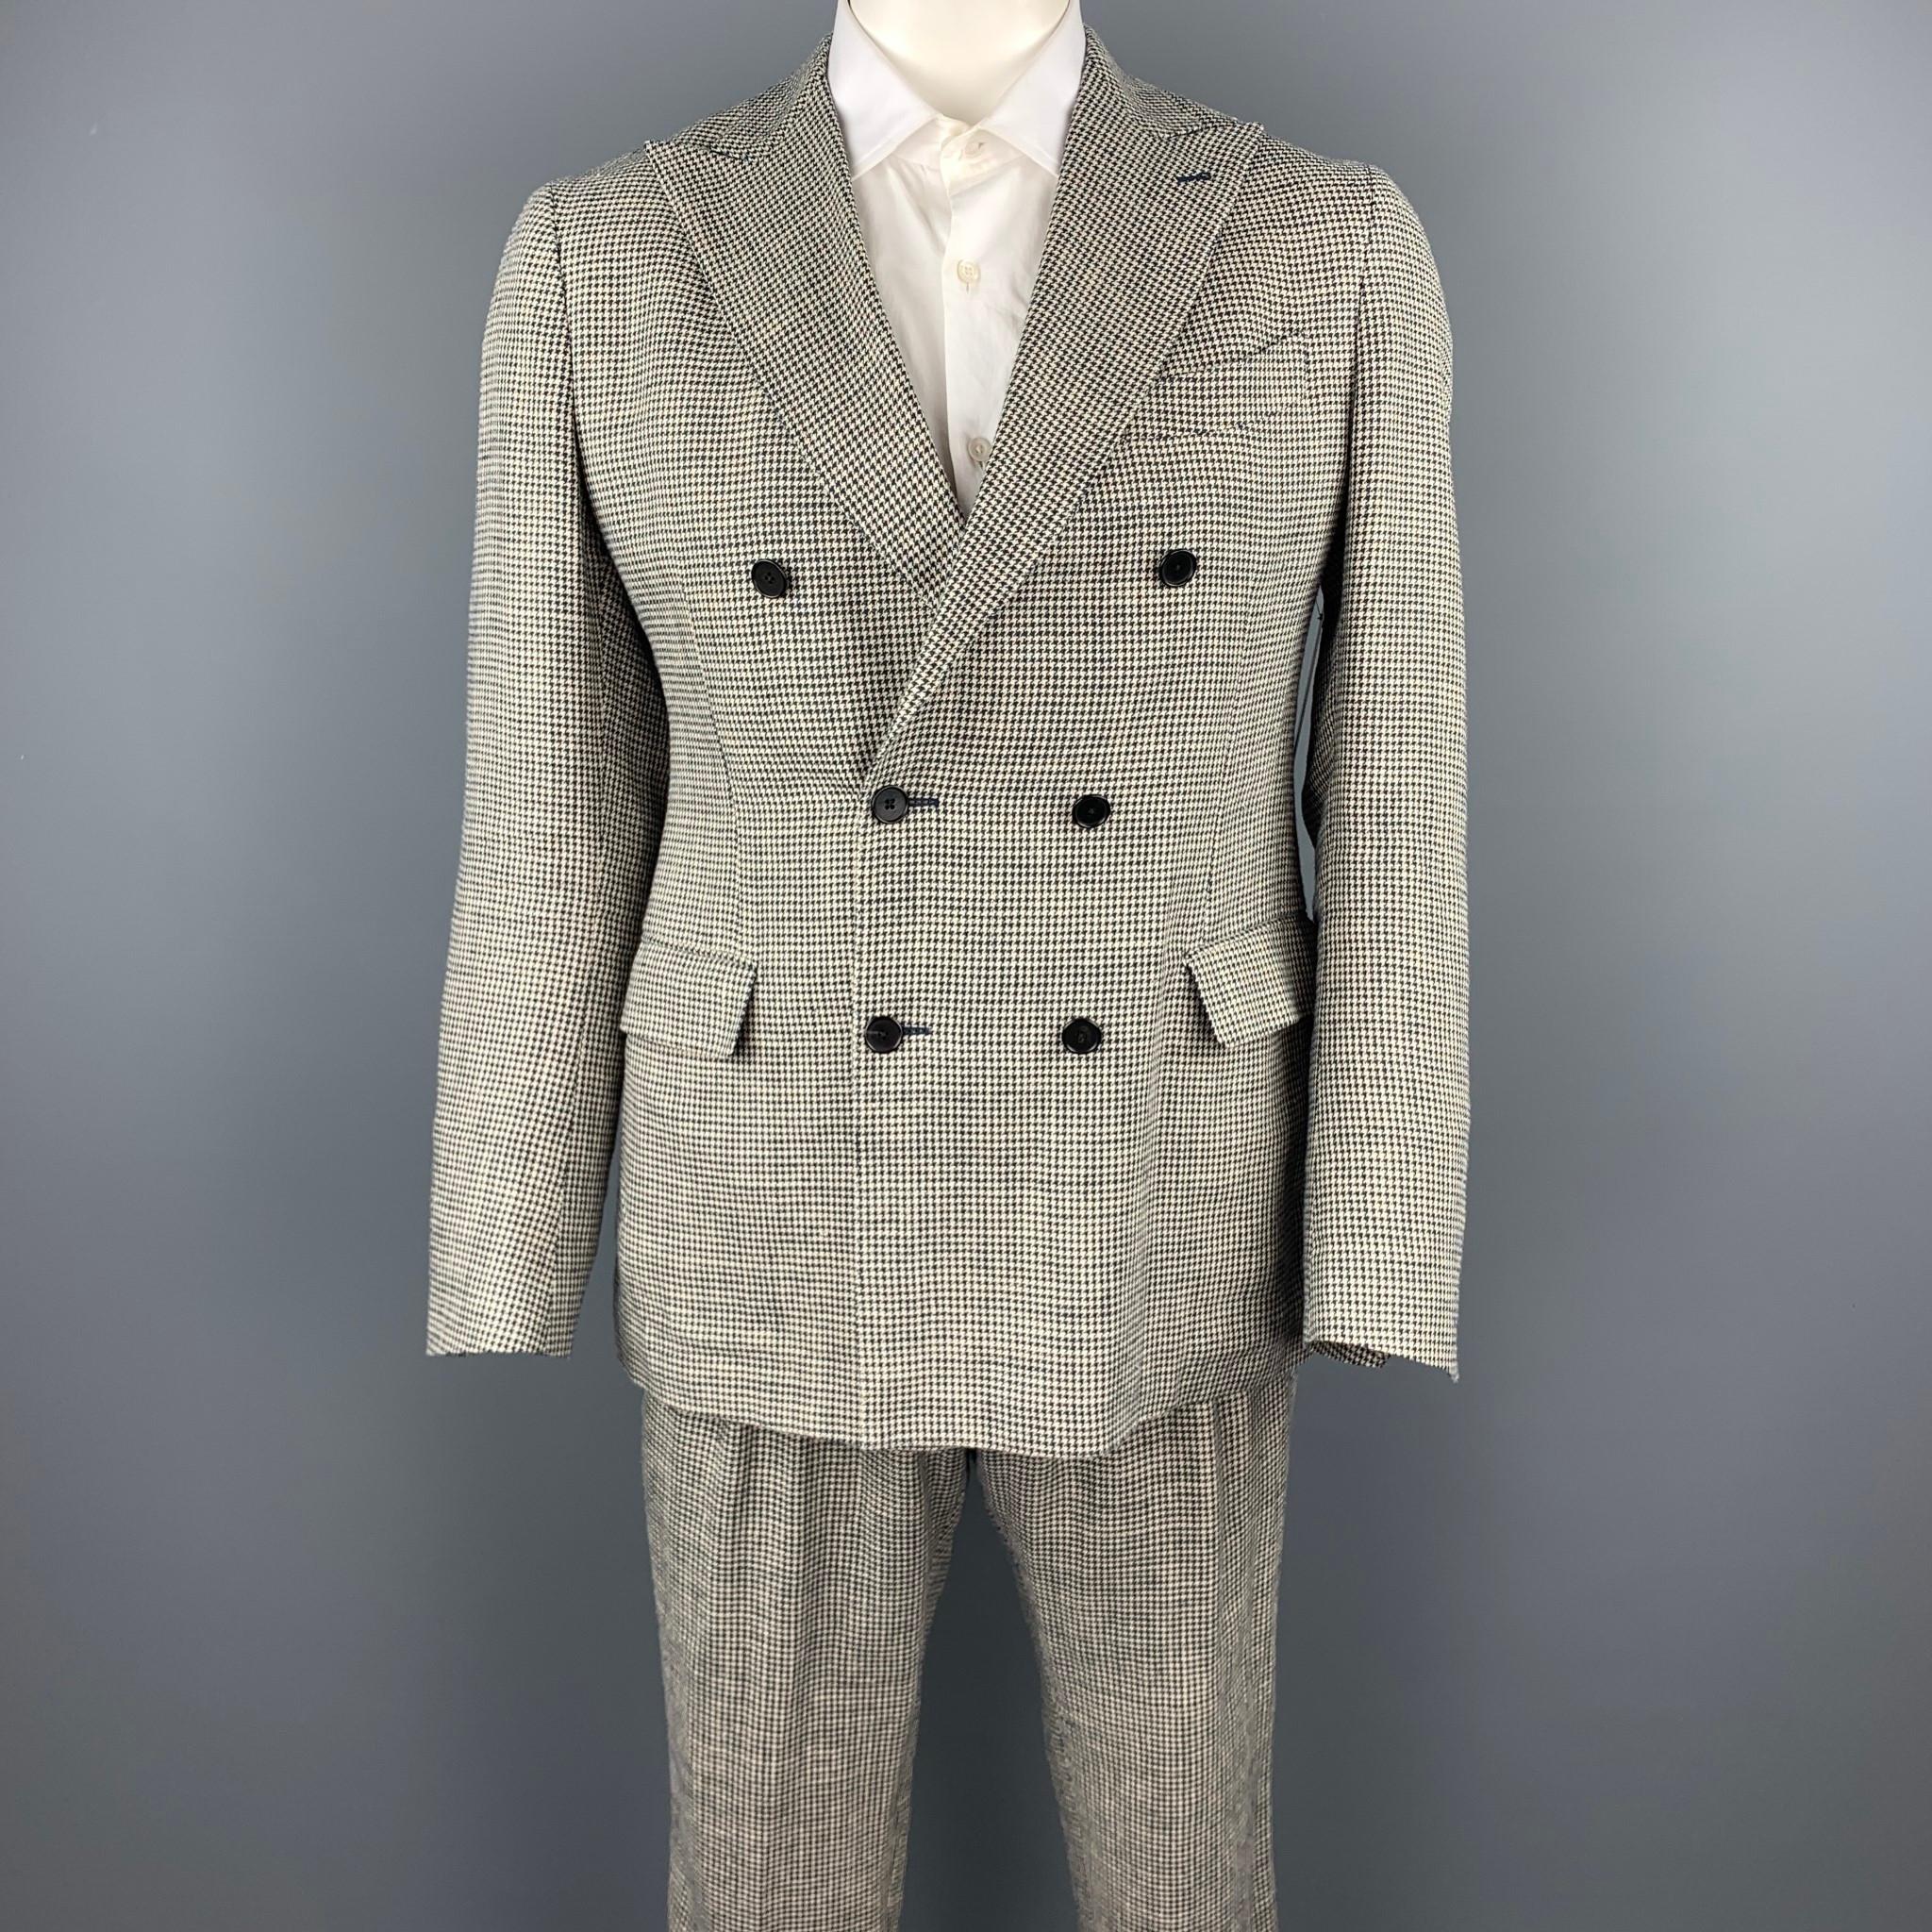 LARDINI suit comes in black & beige houndstooth silk / linen with a full liner and includes a double breasted,  button sport coat with a peak lapel and matching pleated front trousers. Made in Italy.

Very Good Pre-Owned Condition.
Marked: IT 52 R